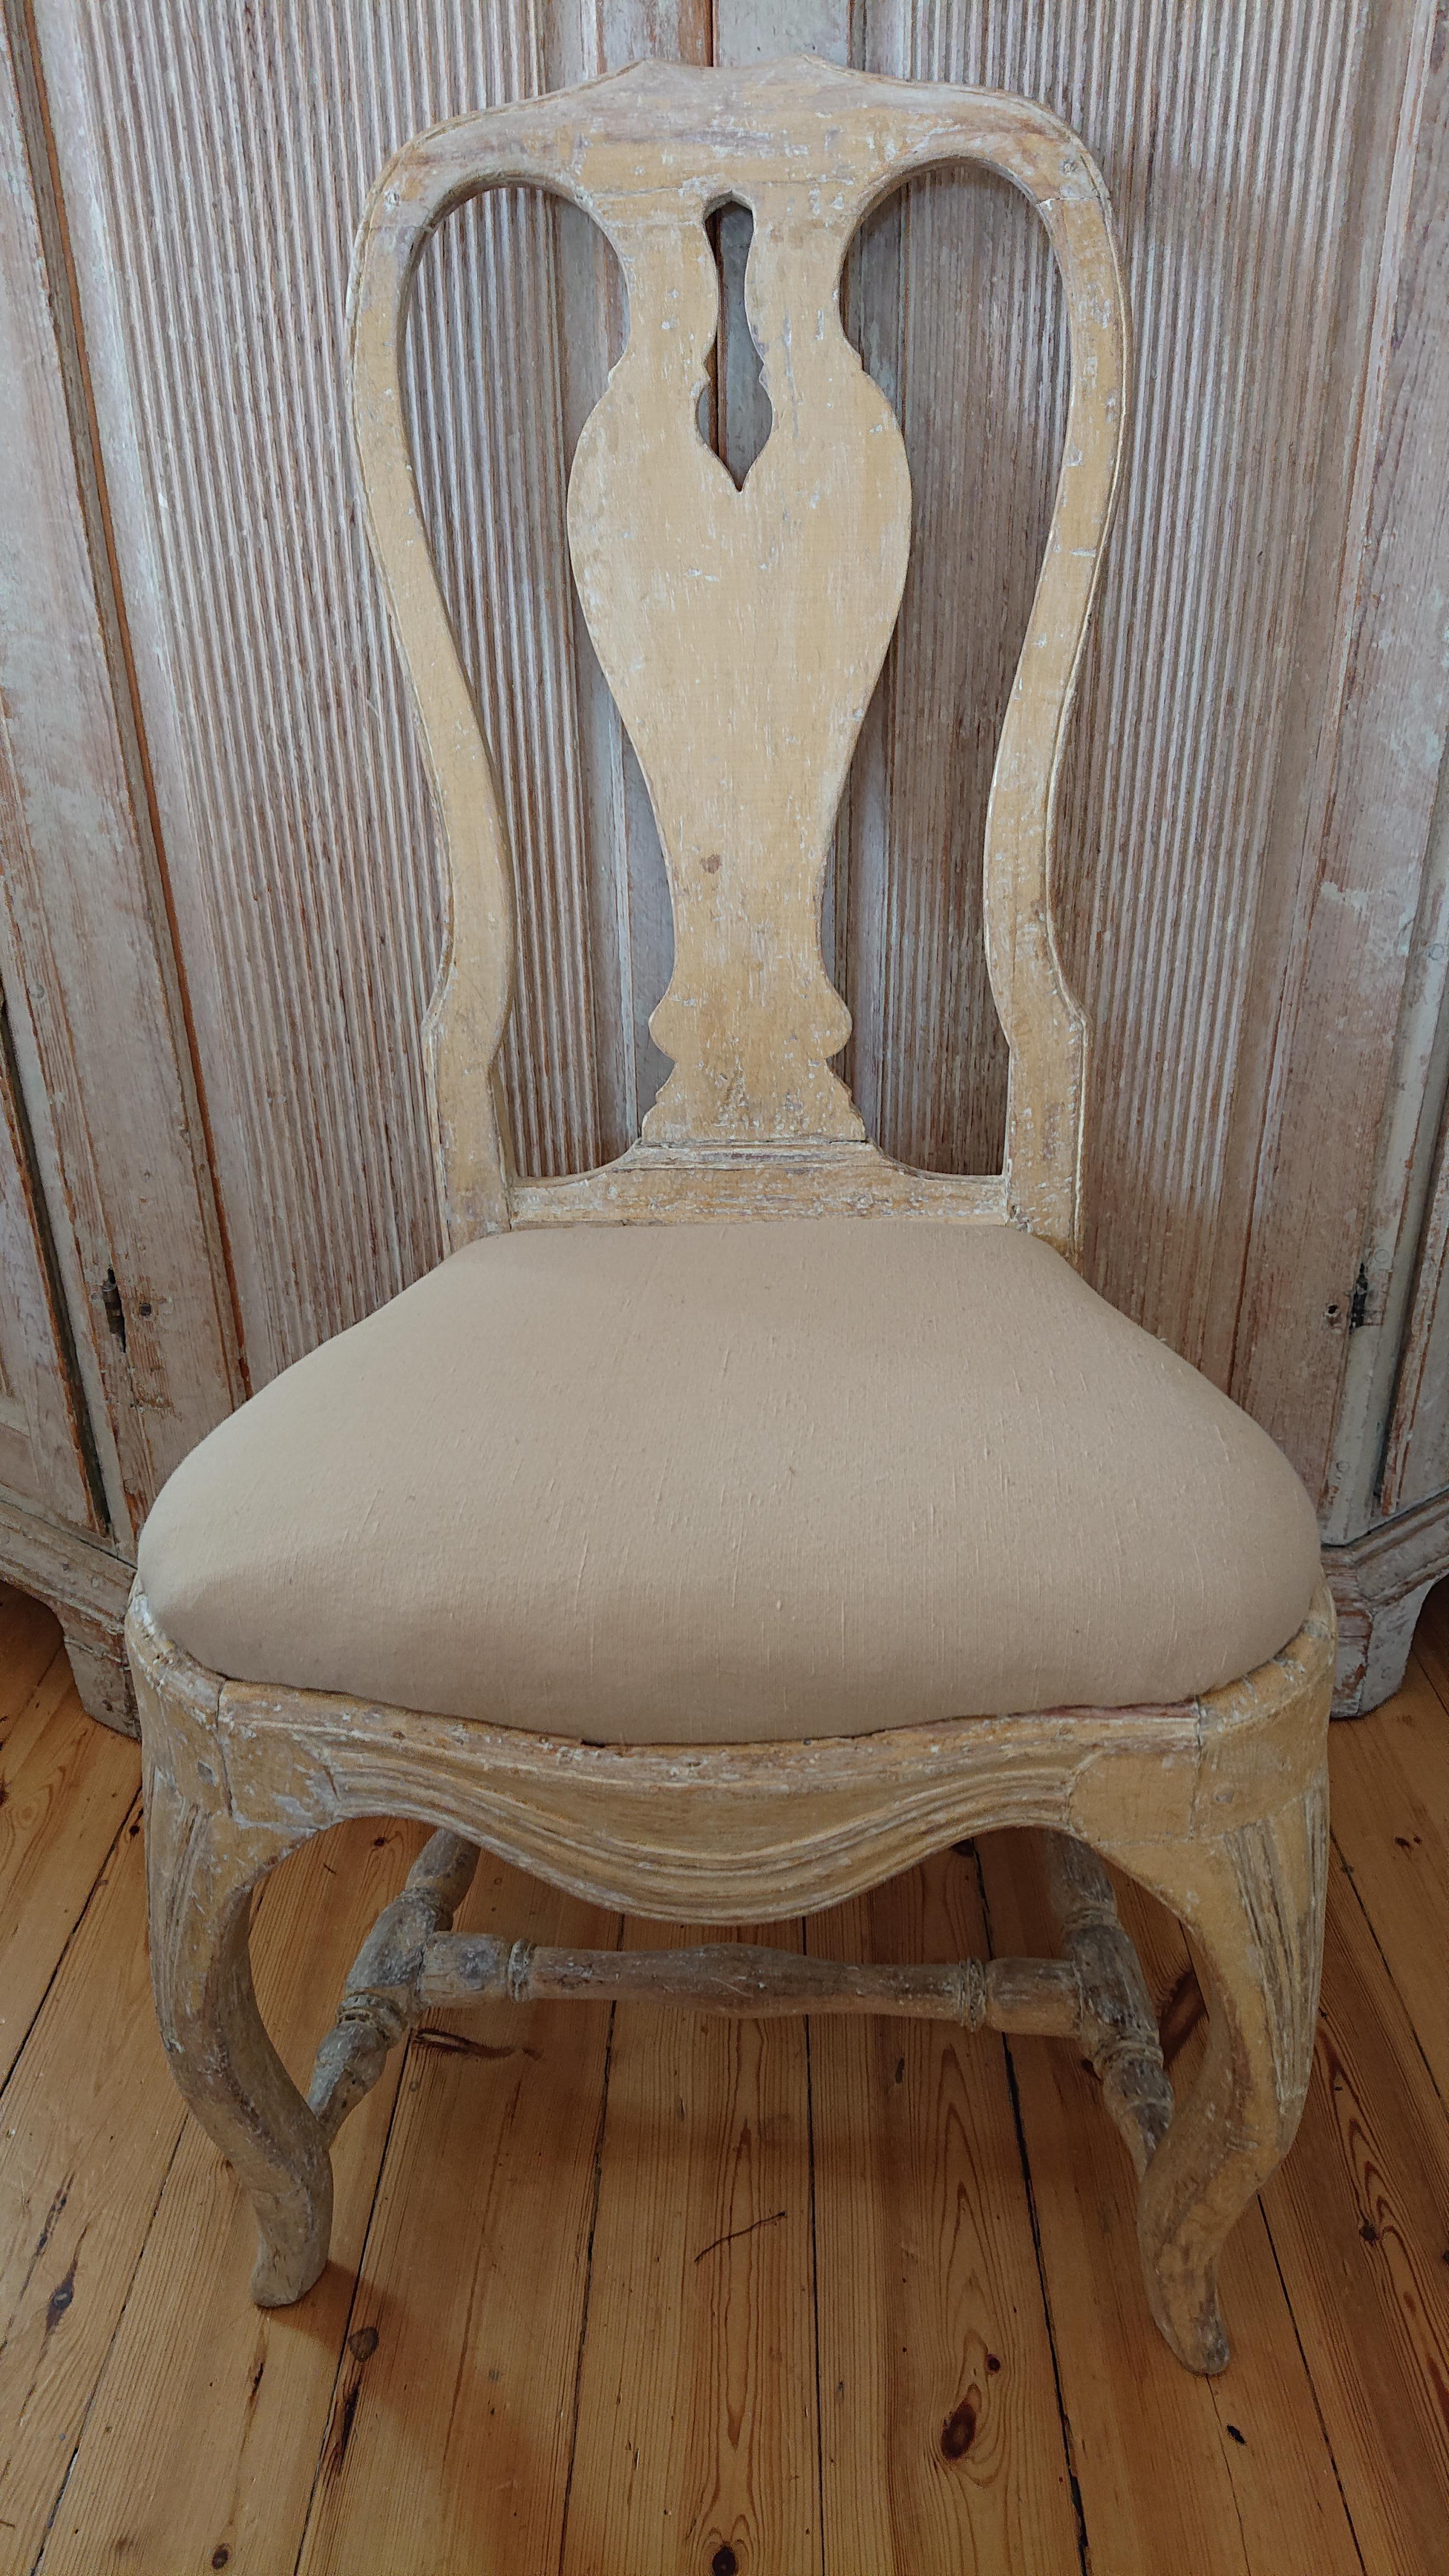 18th Century Swedish Rococo chair from Stockholm, 
Southern Sweden.
A fantastic chair with nice proportions & curvy legs 
It comes from the upper class environment.
Scraped by hand to its well preserved original color.
Stable in